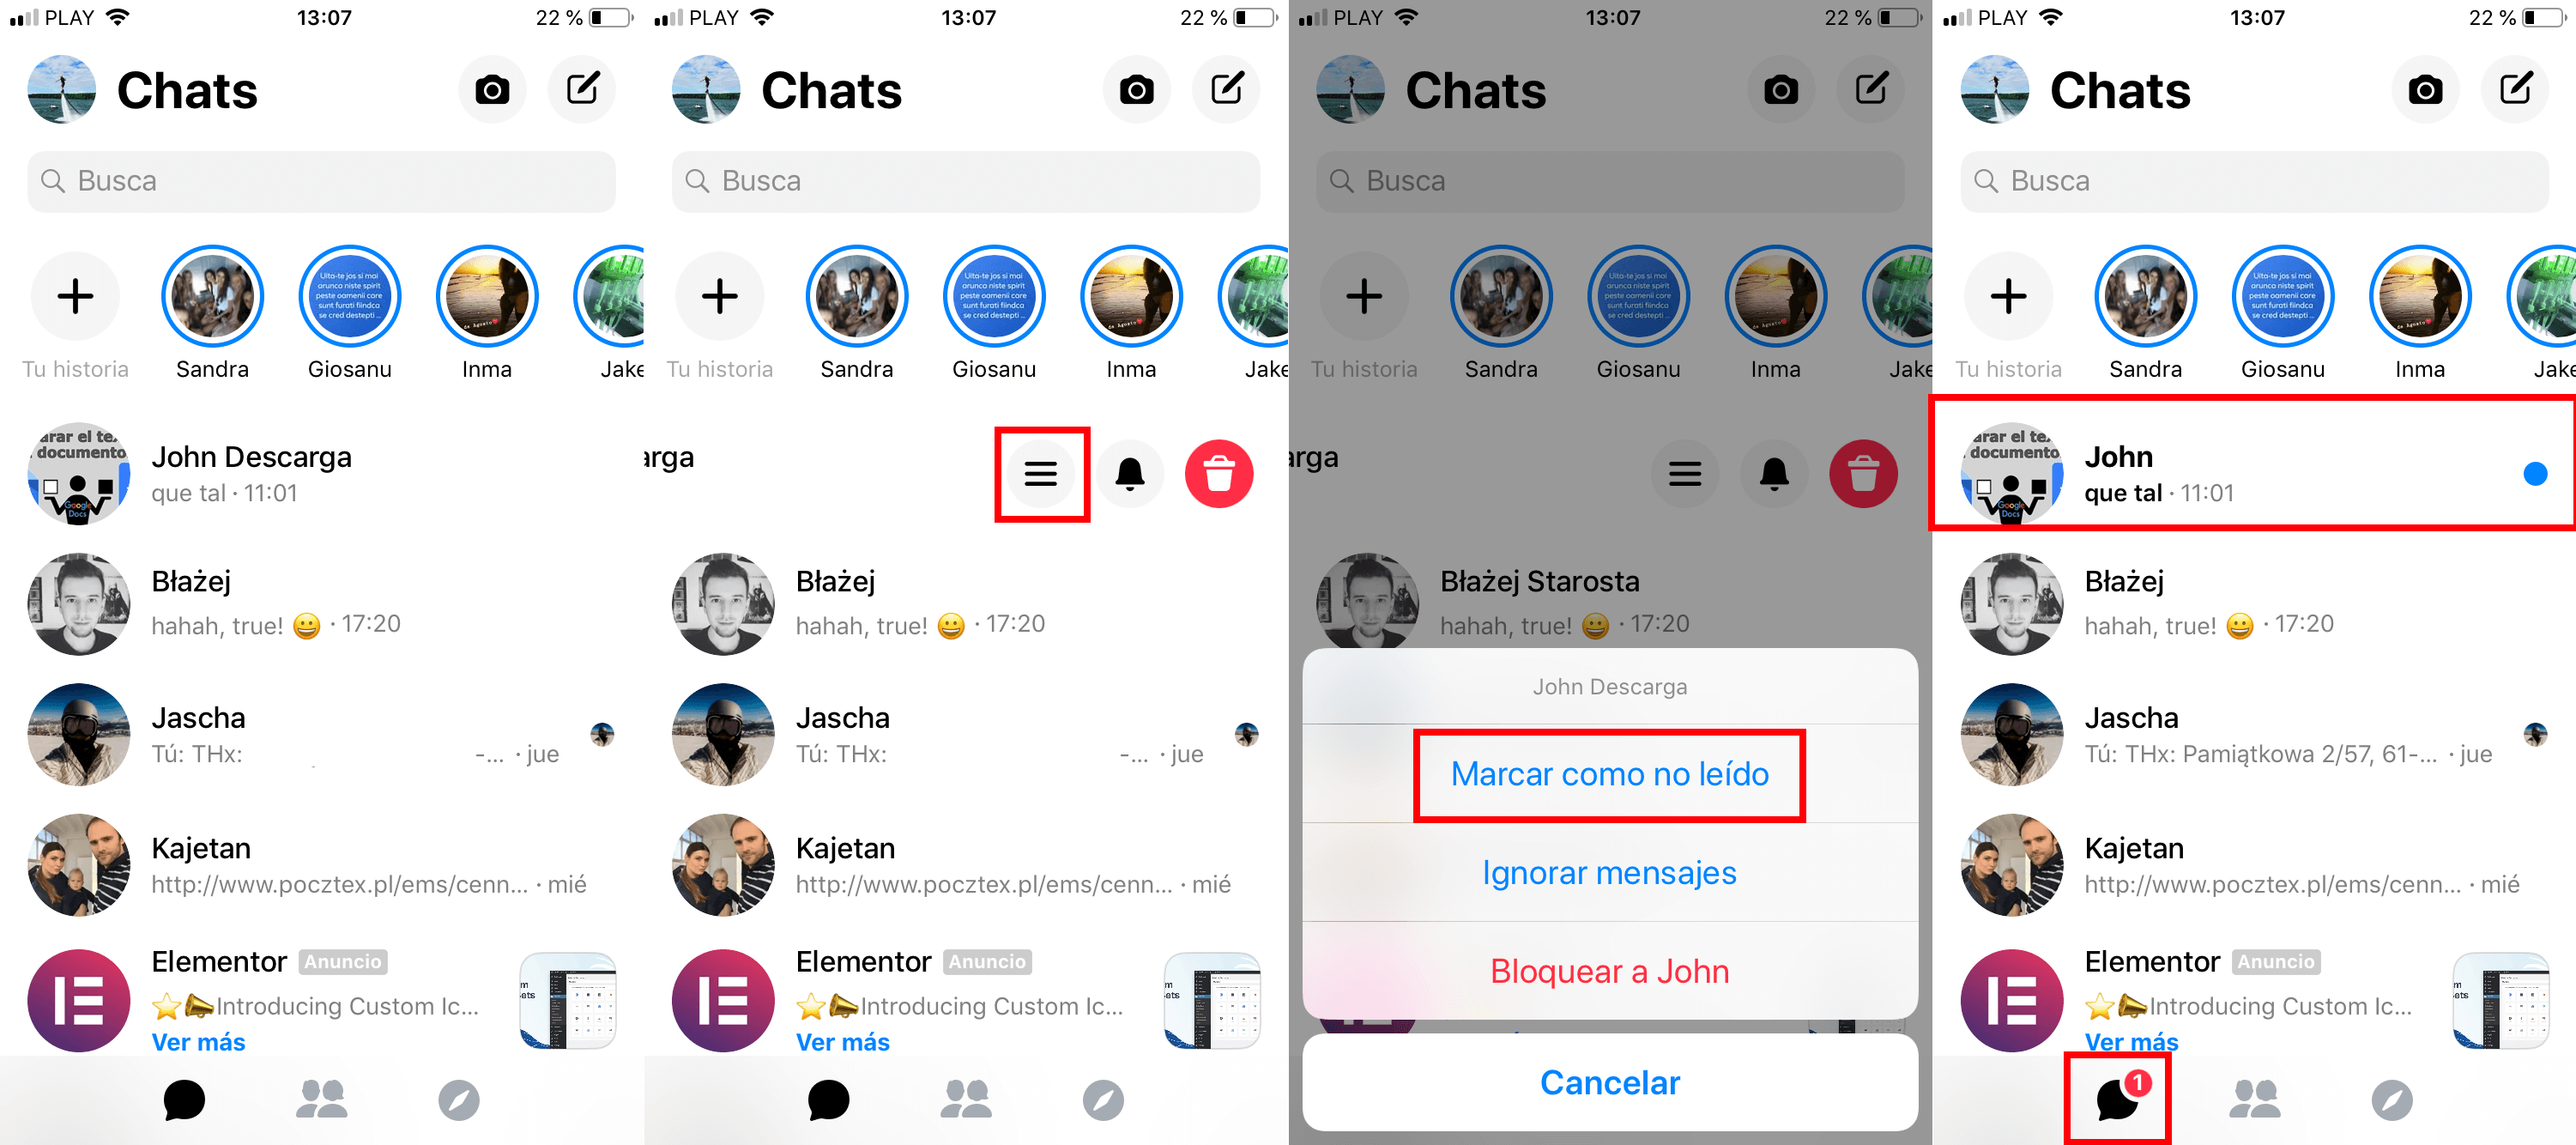 Facebook Messenger allows you to mark chats and messages as Unread